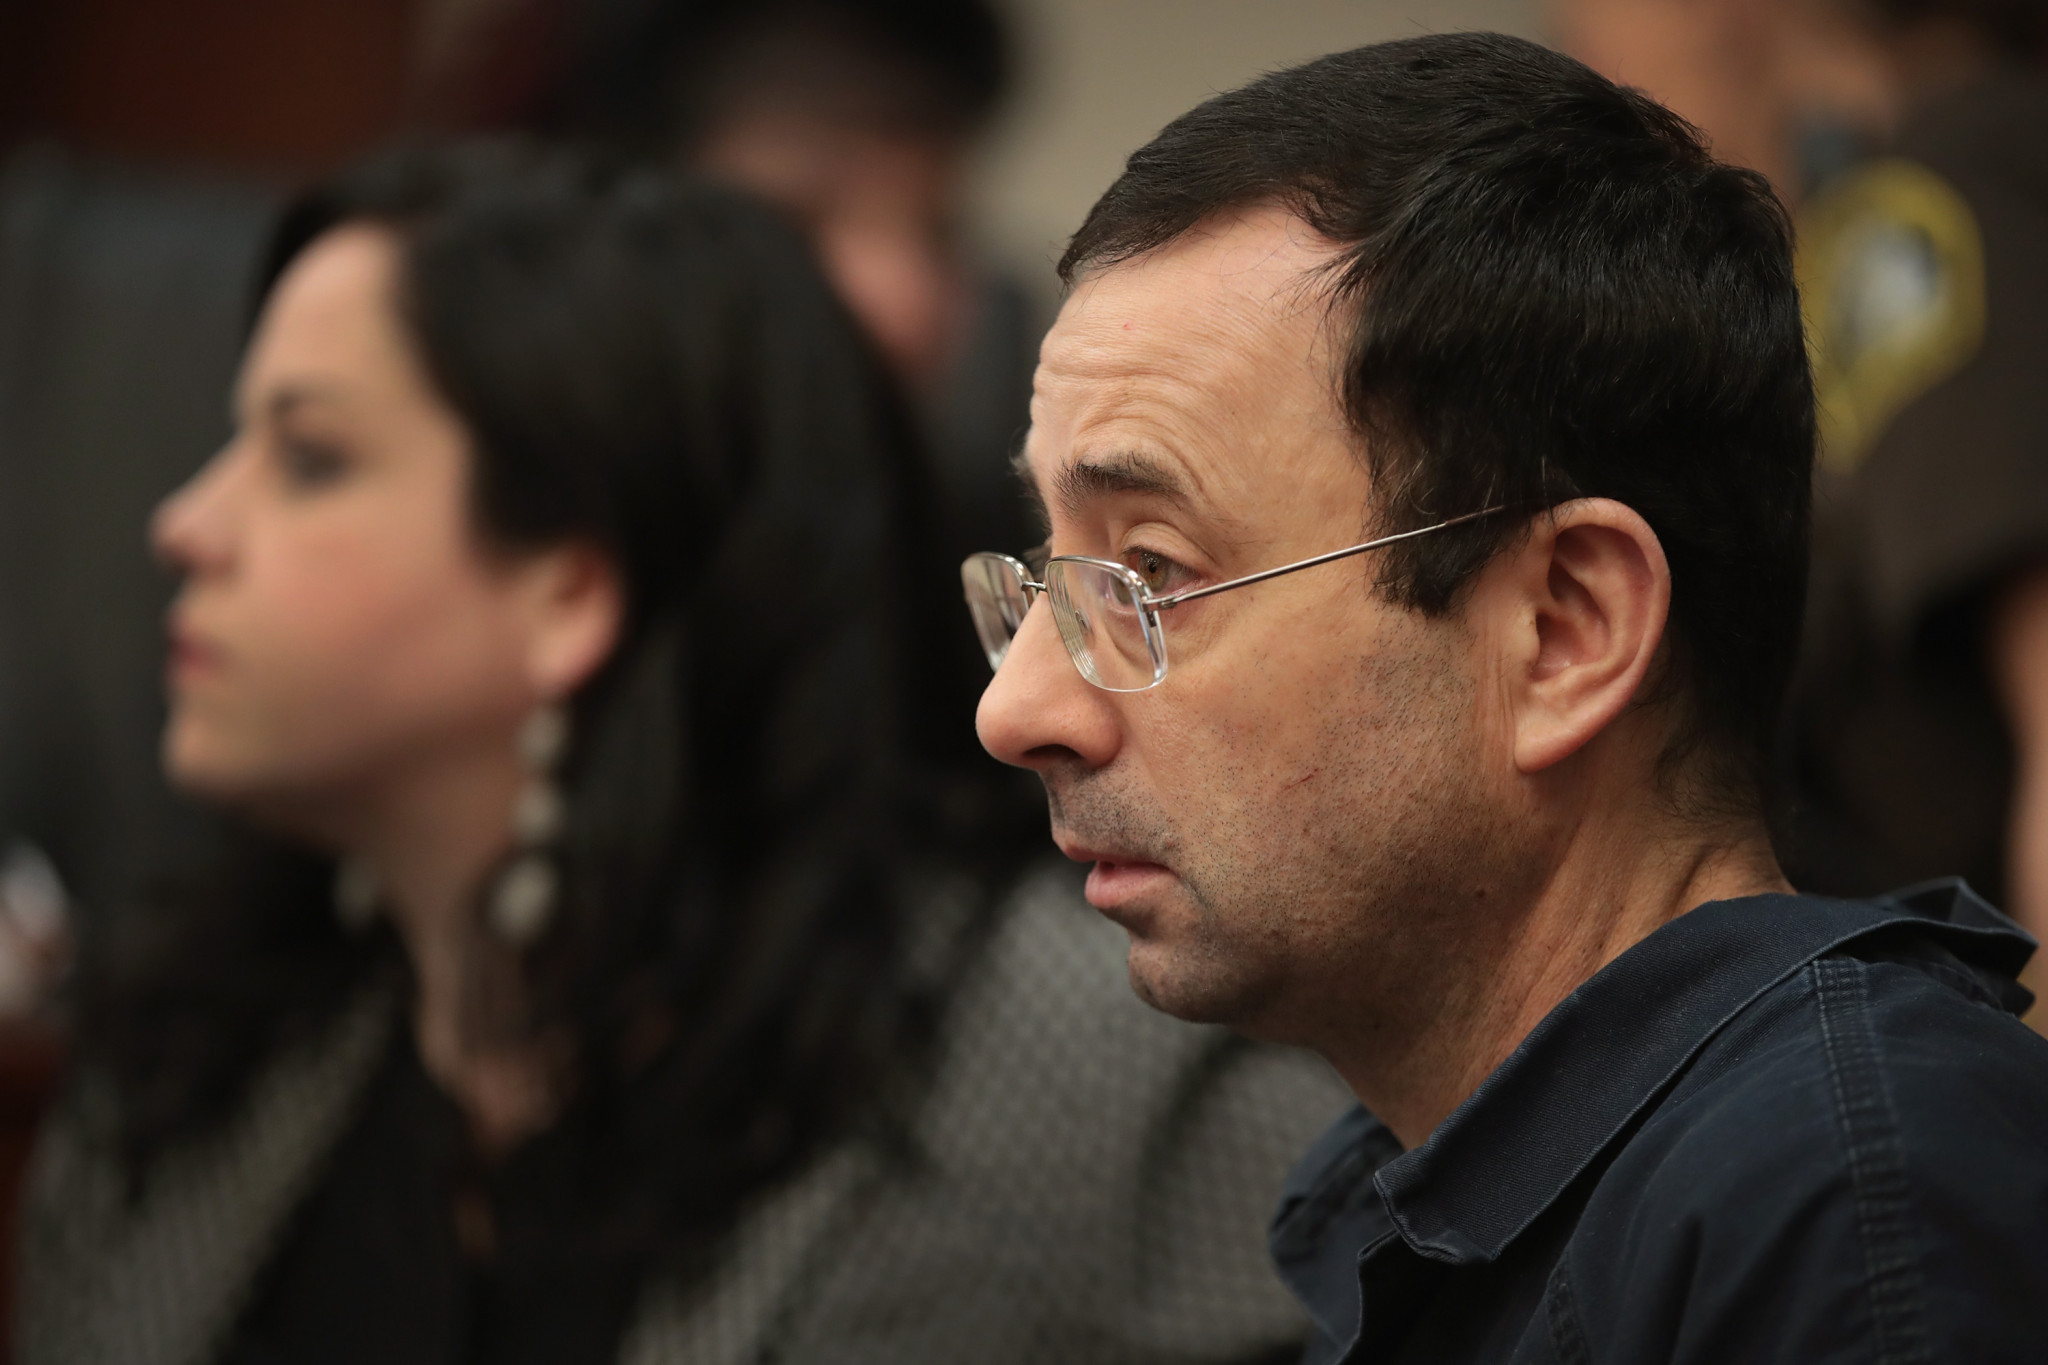 Larry Nassar appears in court as the hearing begins ©Getty Images